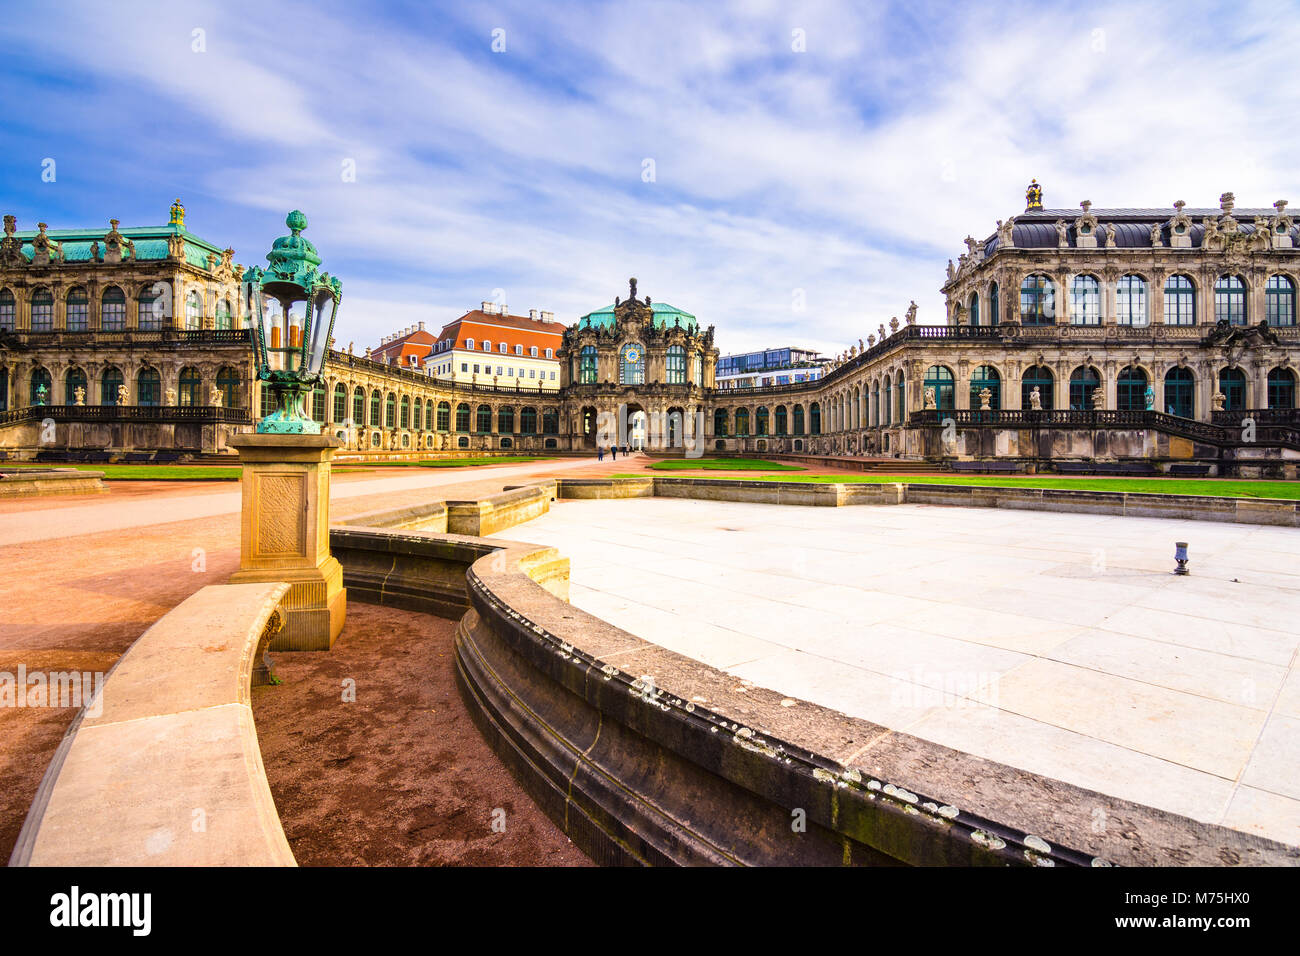 Zwinger palace, art gallery and museum in Dresden, Germany. Stock Photo